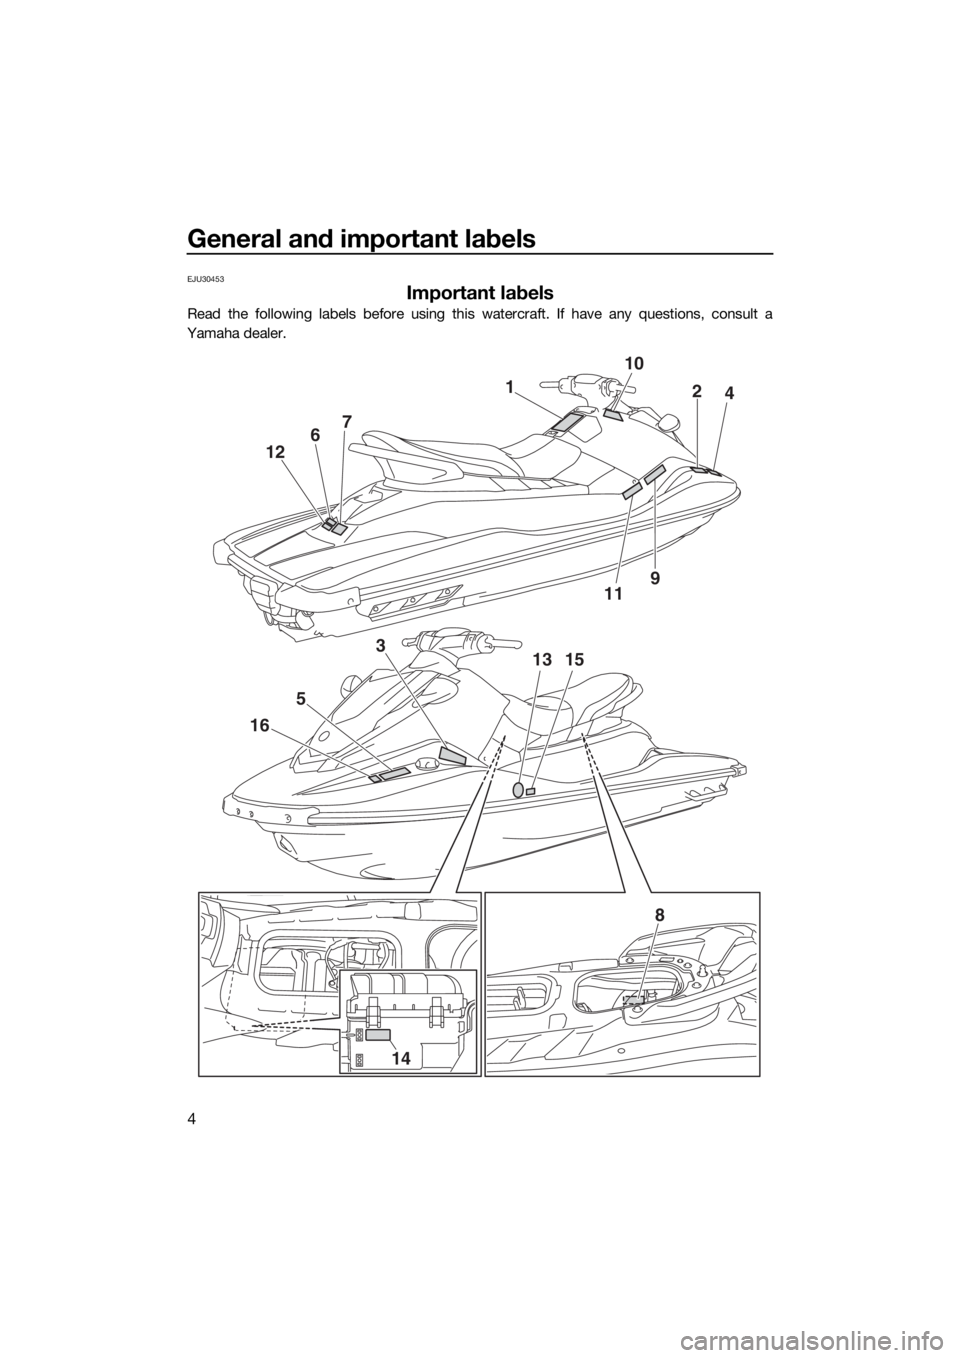 YAMAHA EX 2018  Owners Manual General and important labels
4
EJU30453
Important labels
Read the following labels before using this watercraft. If have any questions, consult a
Yamaha dealer.
110
2
4
119 12
5
163
13
15 7
6
14
8
UF3